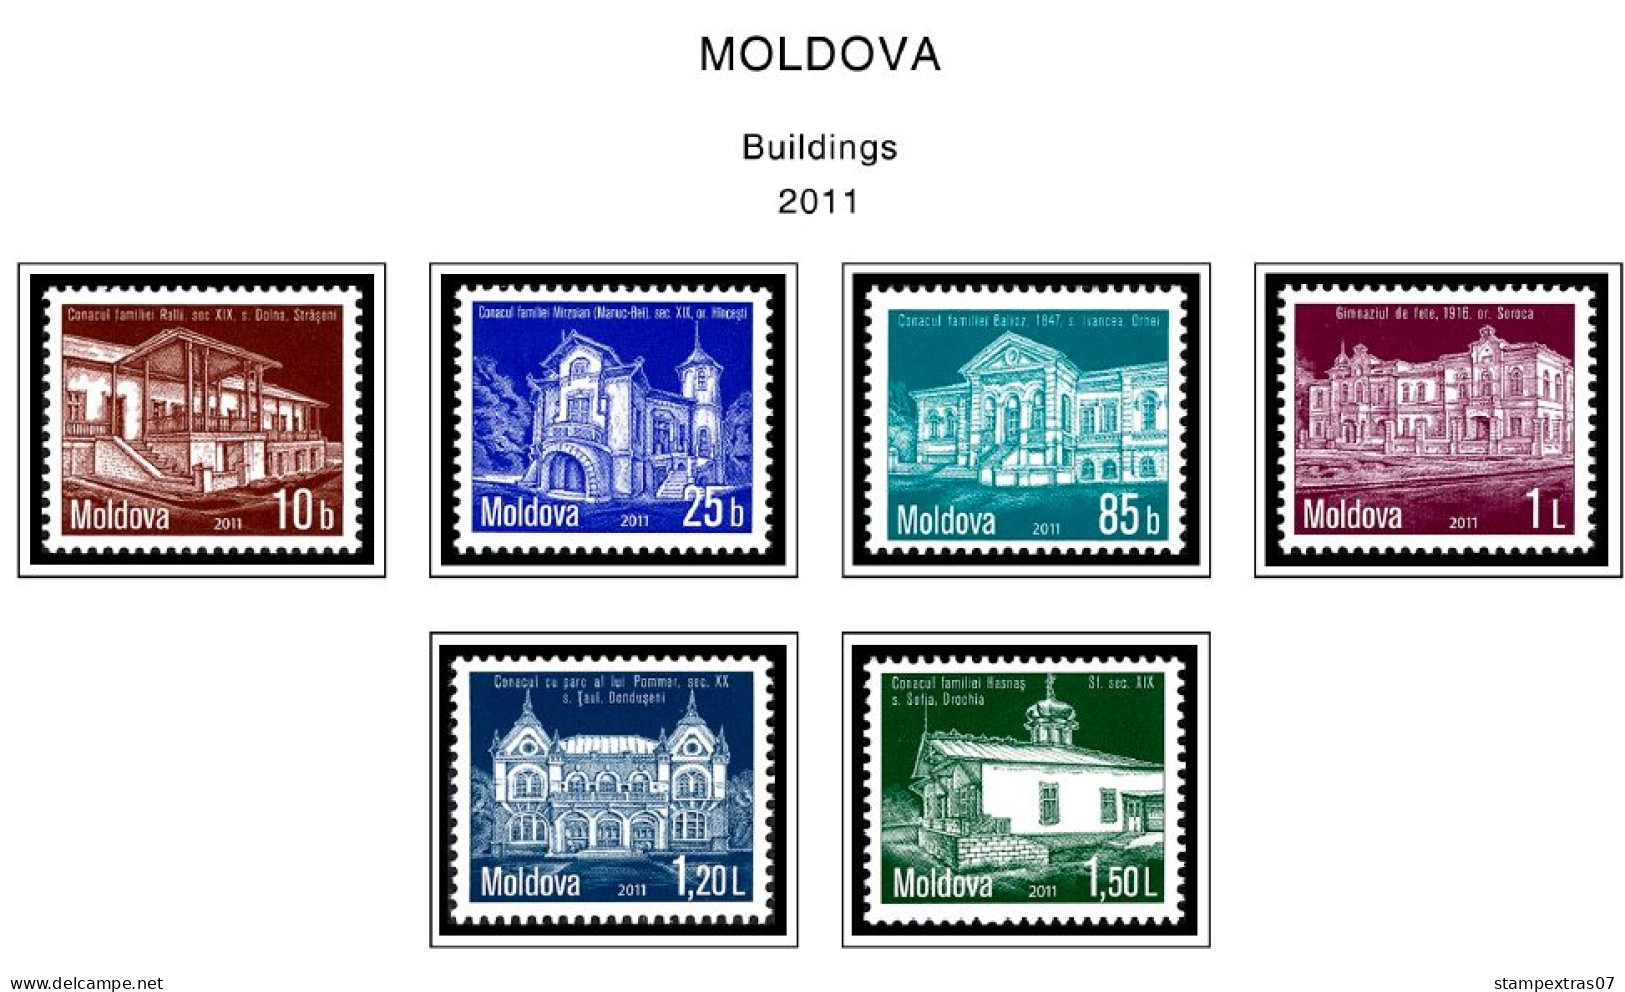 COLOR PRINTED MOLDOVA 2011-2020 STAMP ALBUM PAGES (52 Illustrated Pages) >> FEUILLES ALBUM - Pre-printed Pages